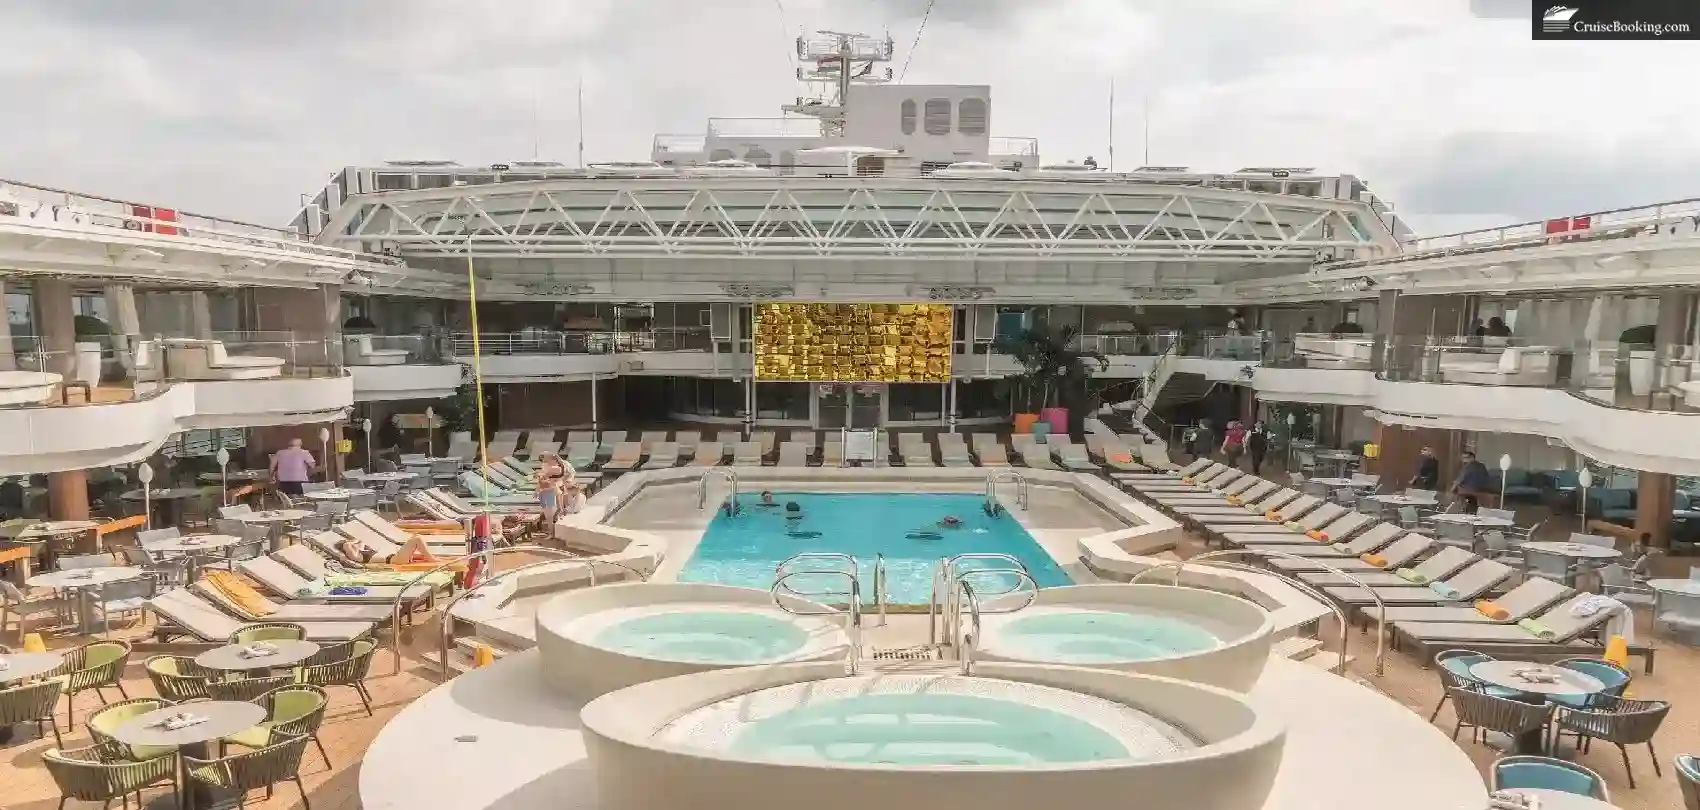 Pool On a Cruise